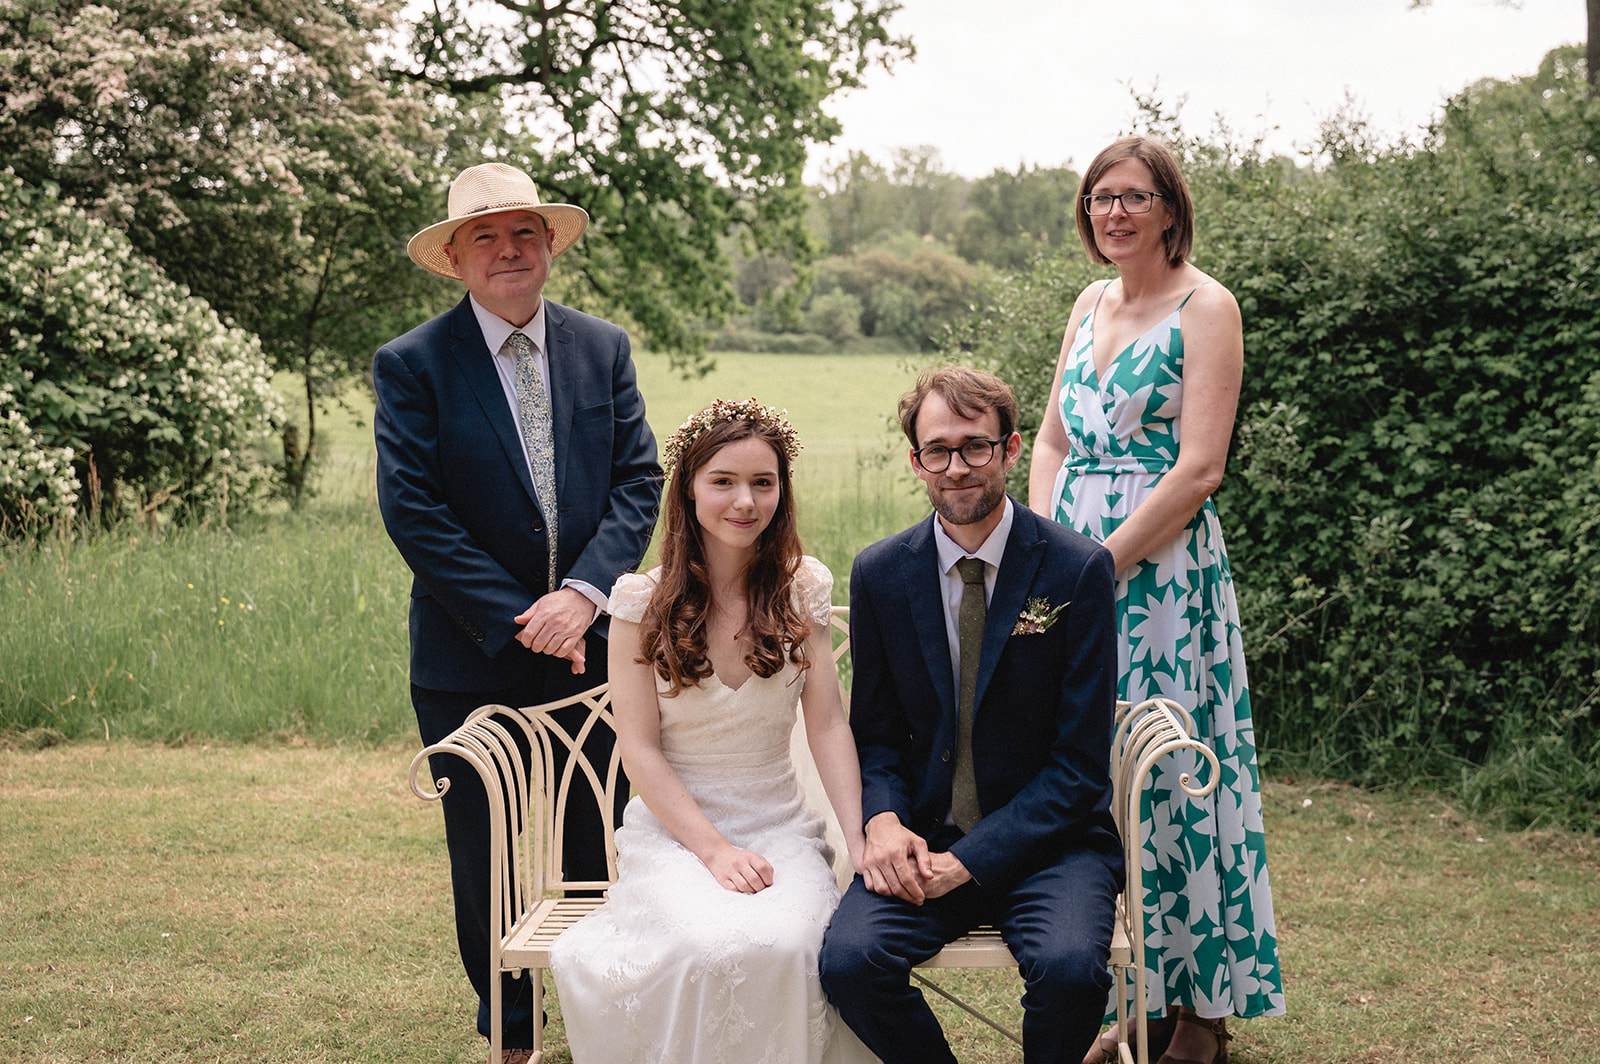 Eleanor and Hartley with witnesses during the Wedding ceremony at the Organ House at St. Paul's Walden Bury